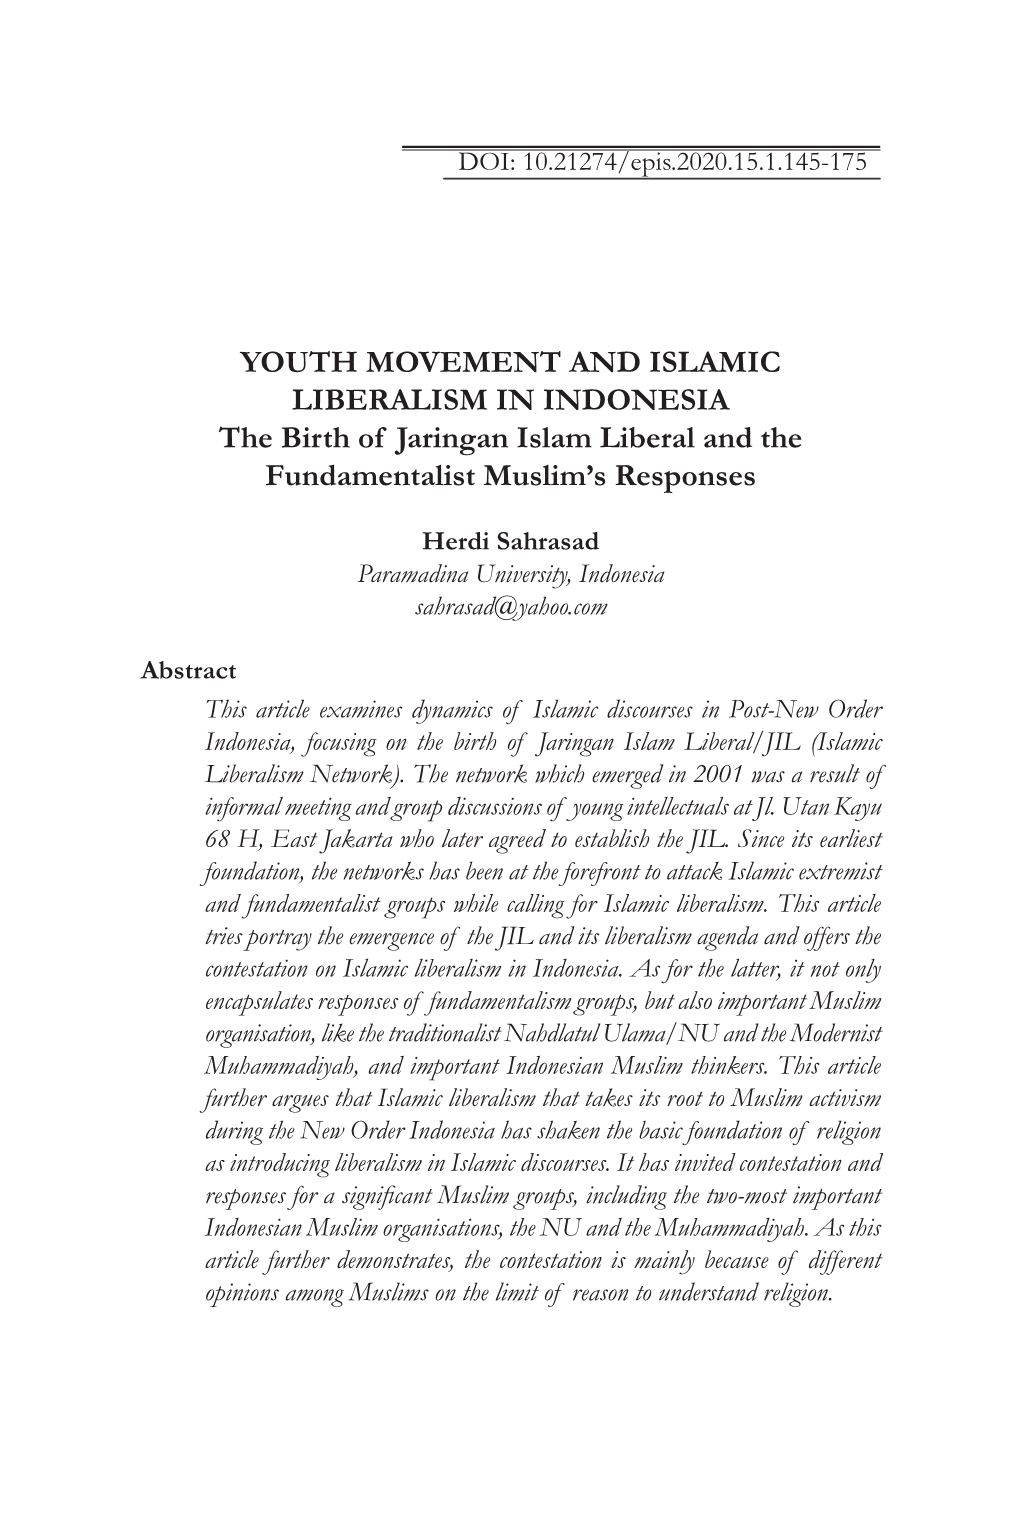 YOUTH MOVEMENT and ISLAMIC LIBERALISM in INDONESIA the Birth of Jaringan Islam Liberal and the Fundamentalist Muslim's Respons